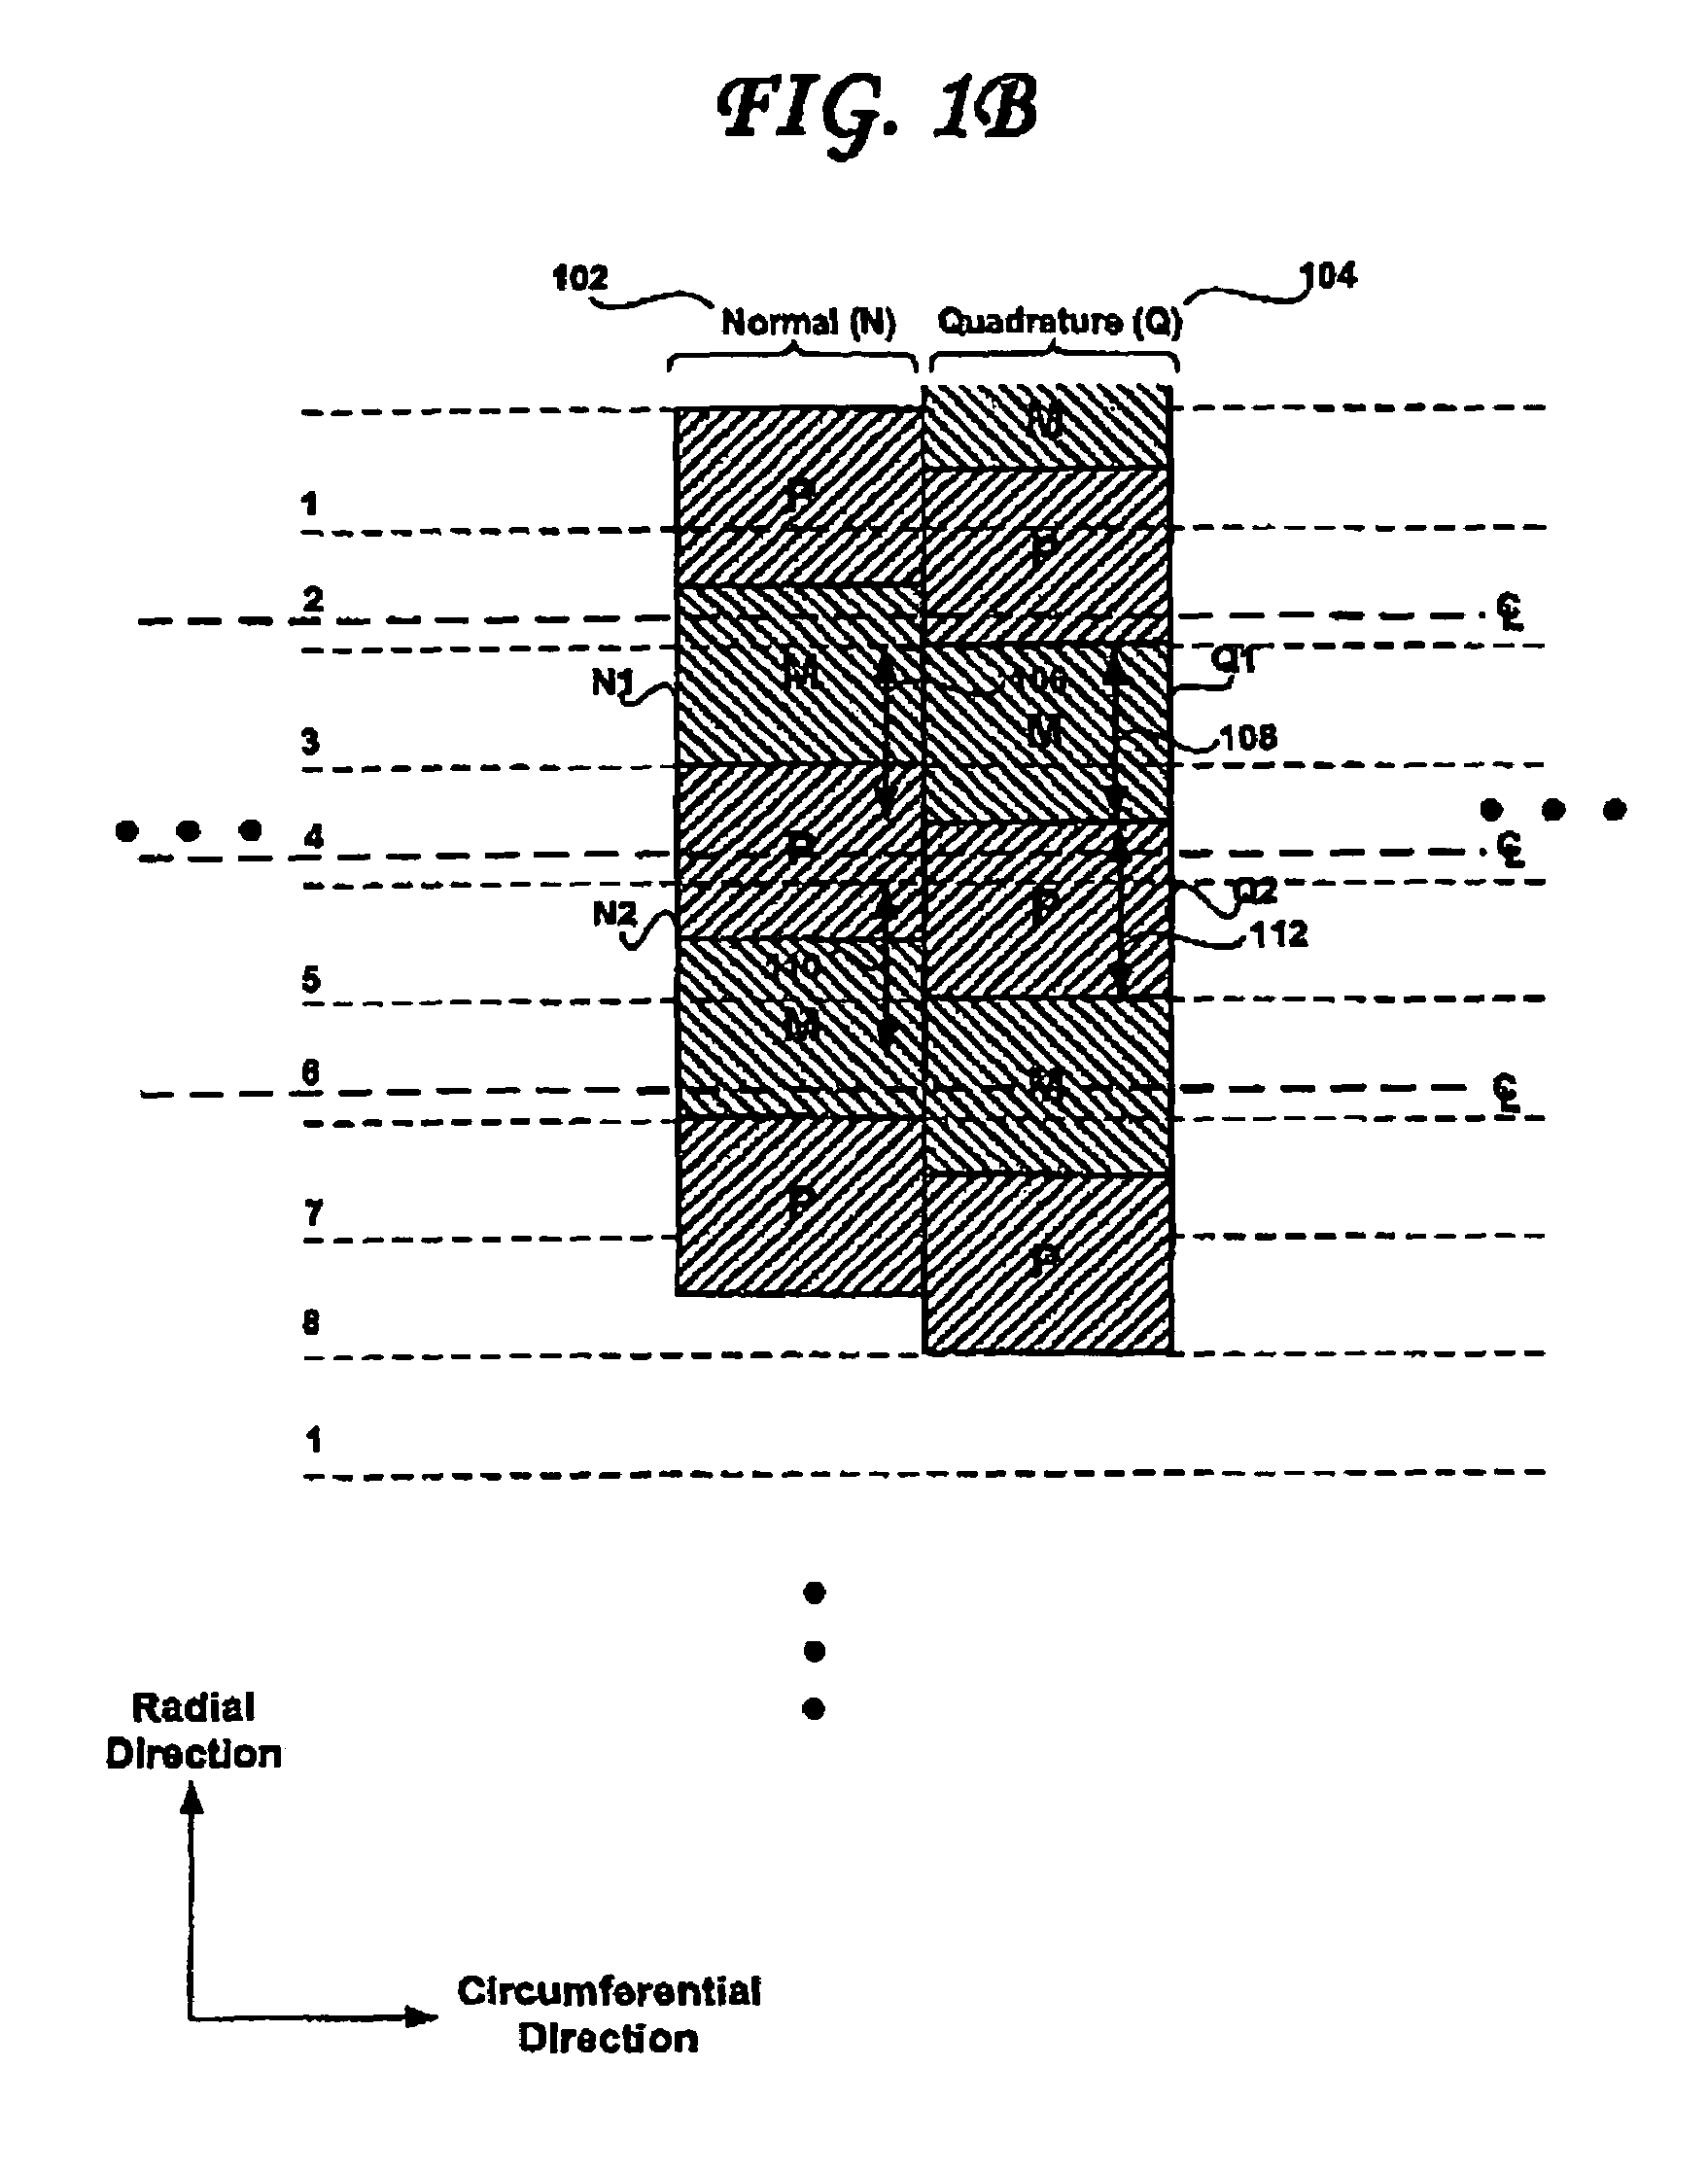 Disk drive having a disk including a servo burst pattern that improves the signal to noise ratio during track following for writing